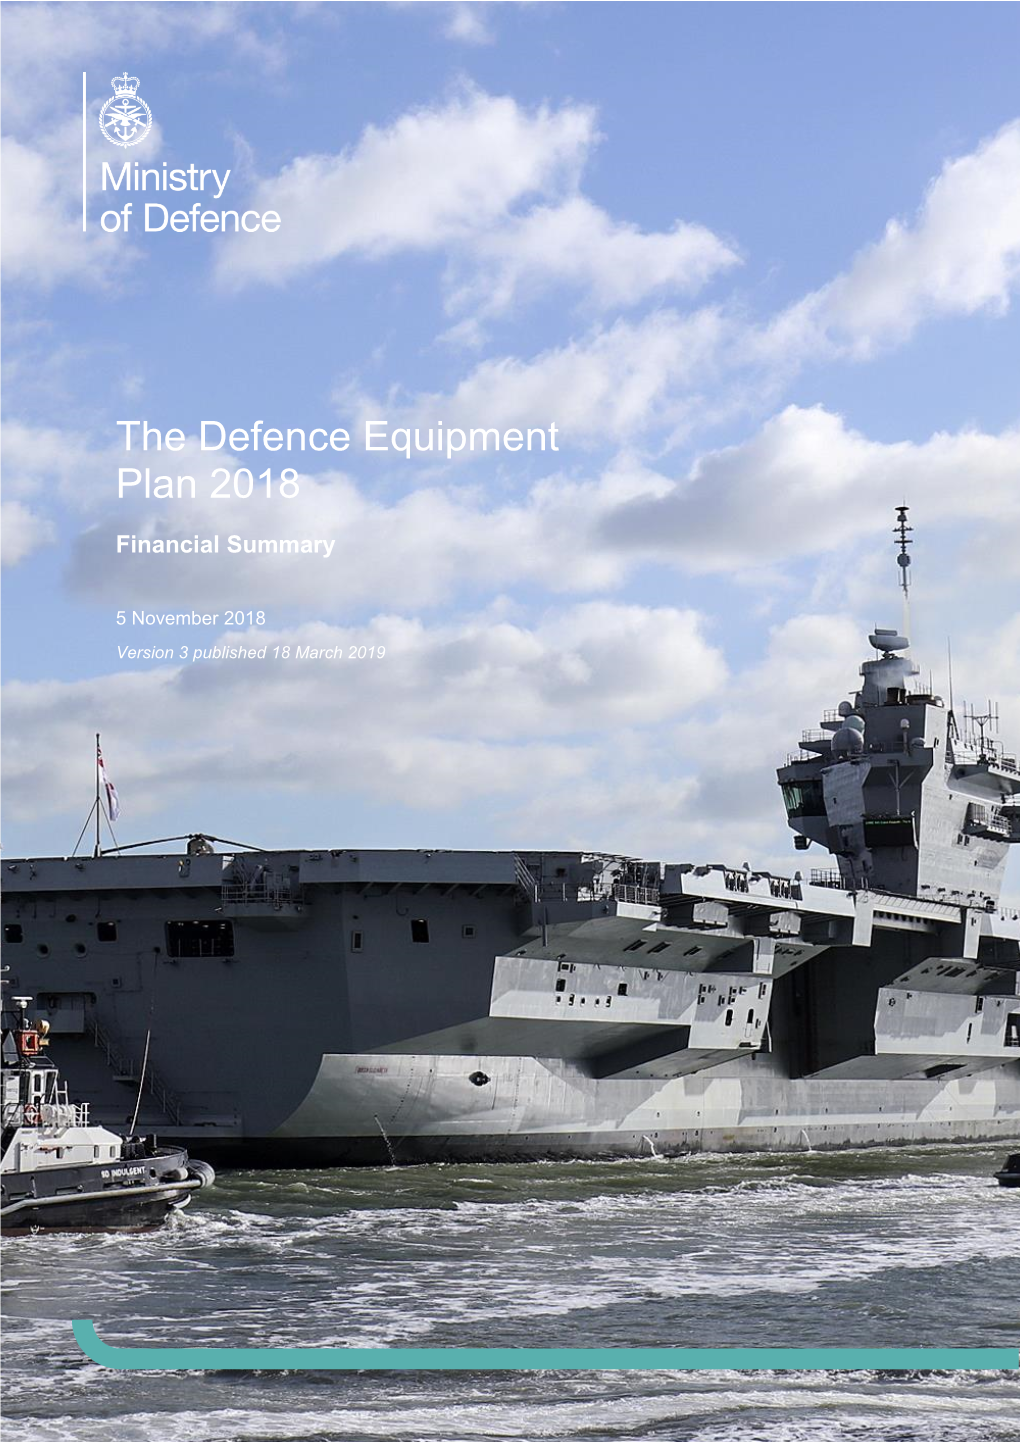 The Defence Equipment Plan 2018